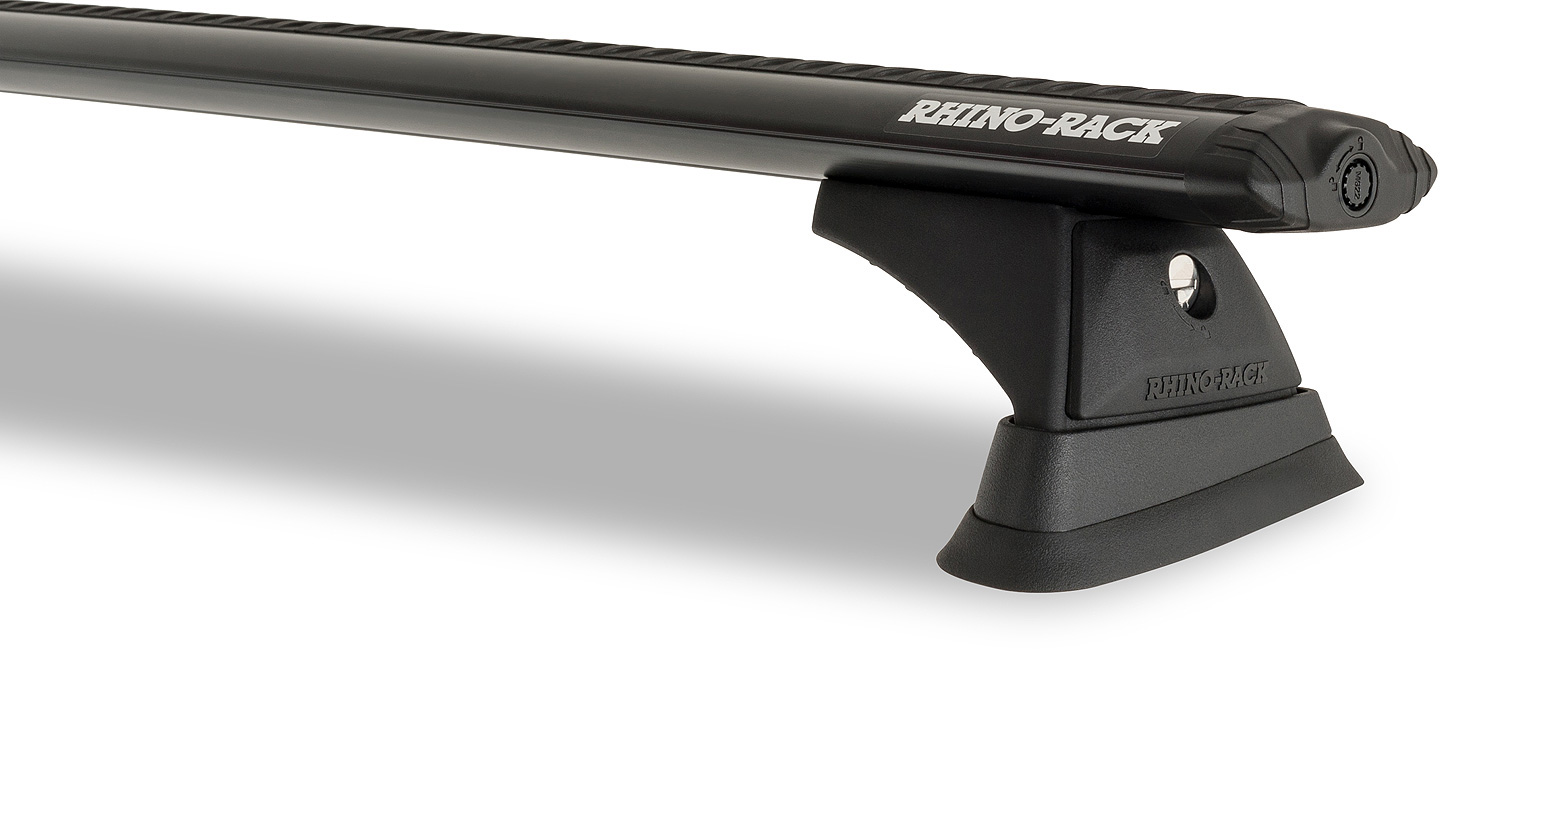 Rhino Rack JA9589 Vortex RCH Black 3 Bar Roof Rack for Lexus LX470 5dr SUV with Raised Roof Rail (1998 to 2007) - Factory Point Mount